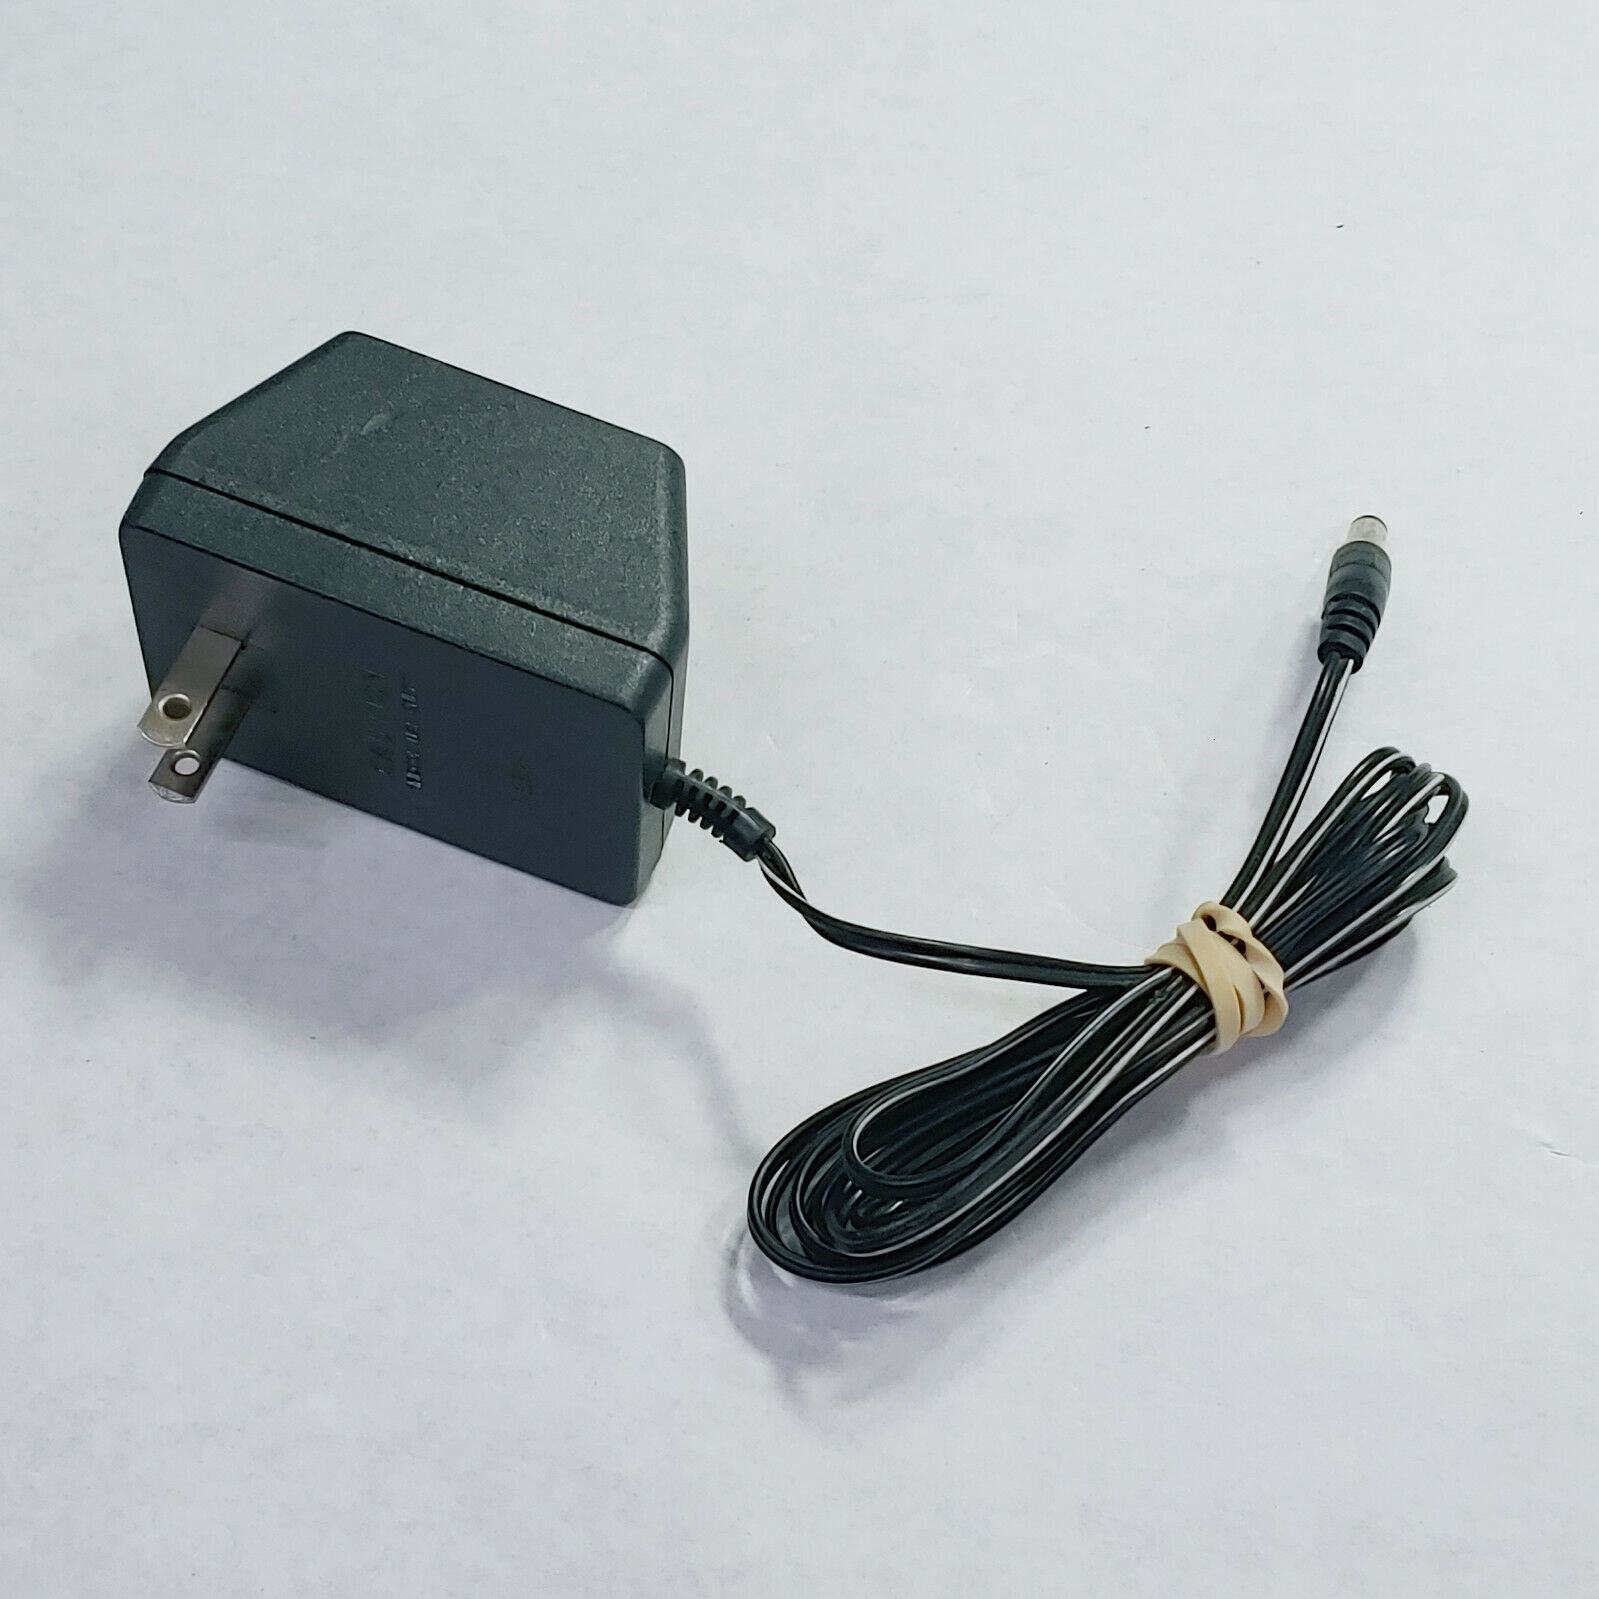 DC 12V 1A 2A 3A 5A Power Supply Adapter Charger Transformer For 5050 LED Strips - Click Image to Close